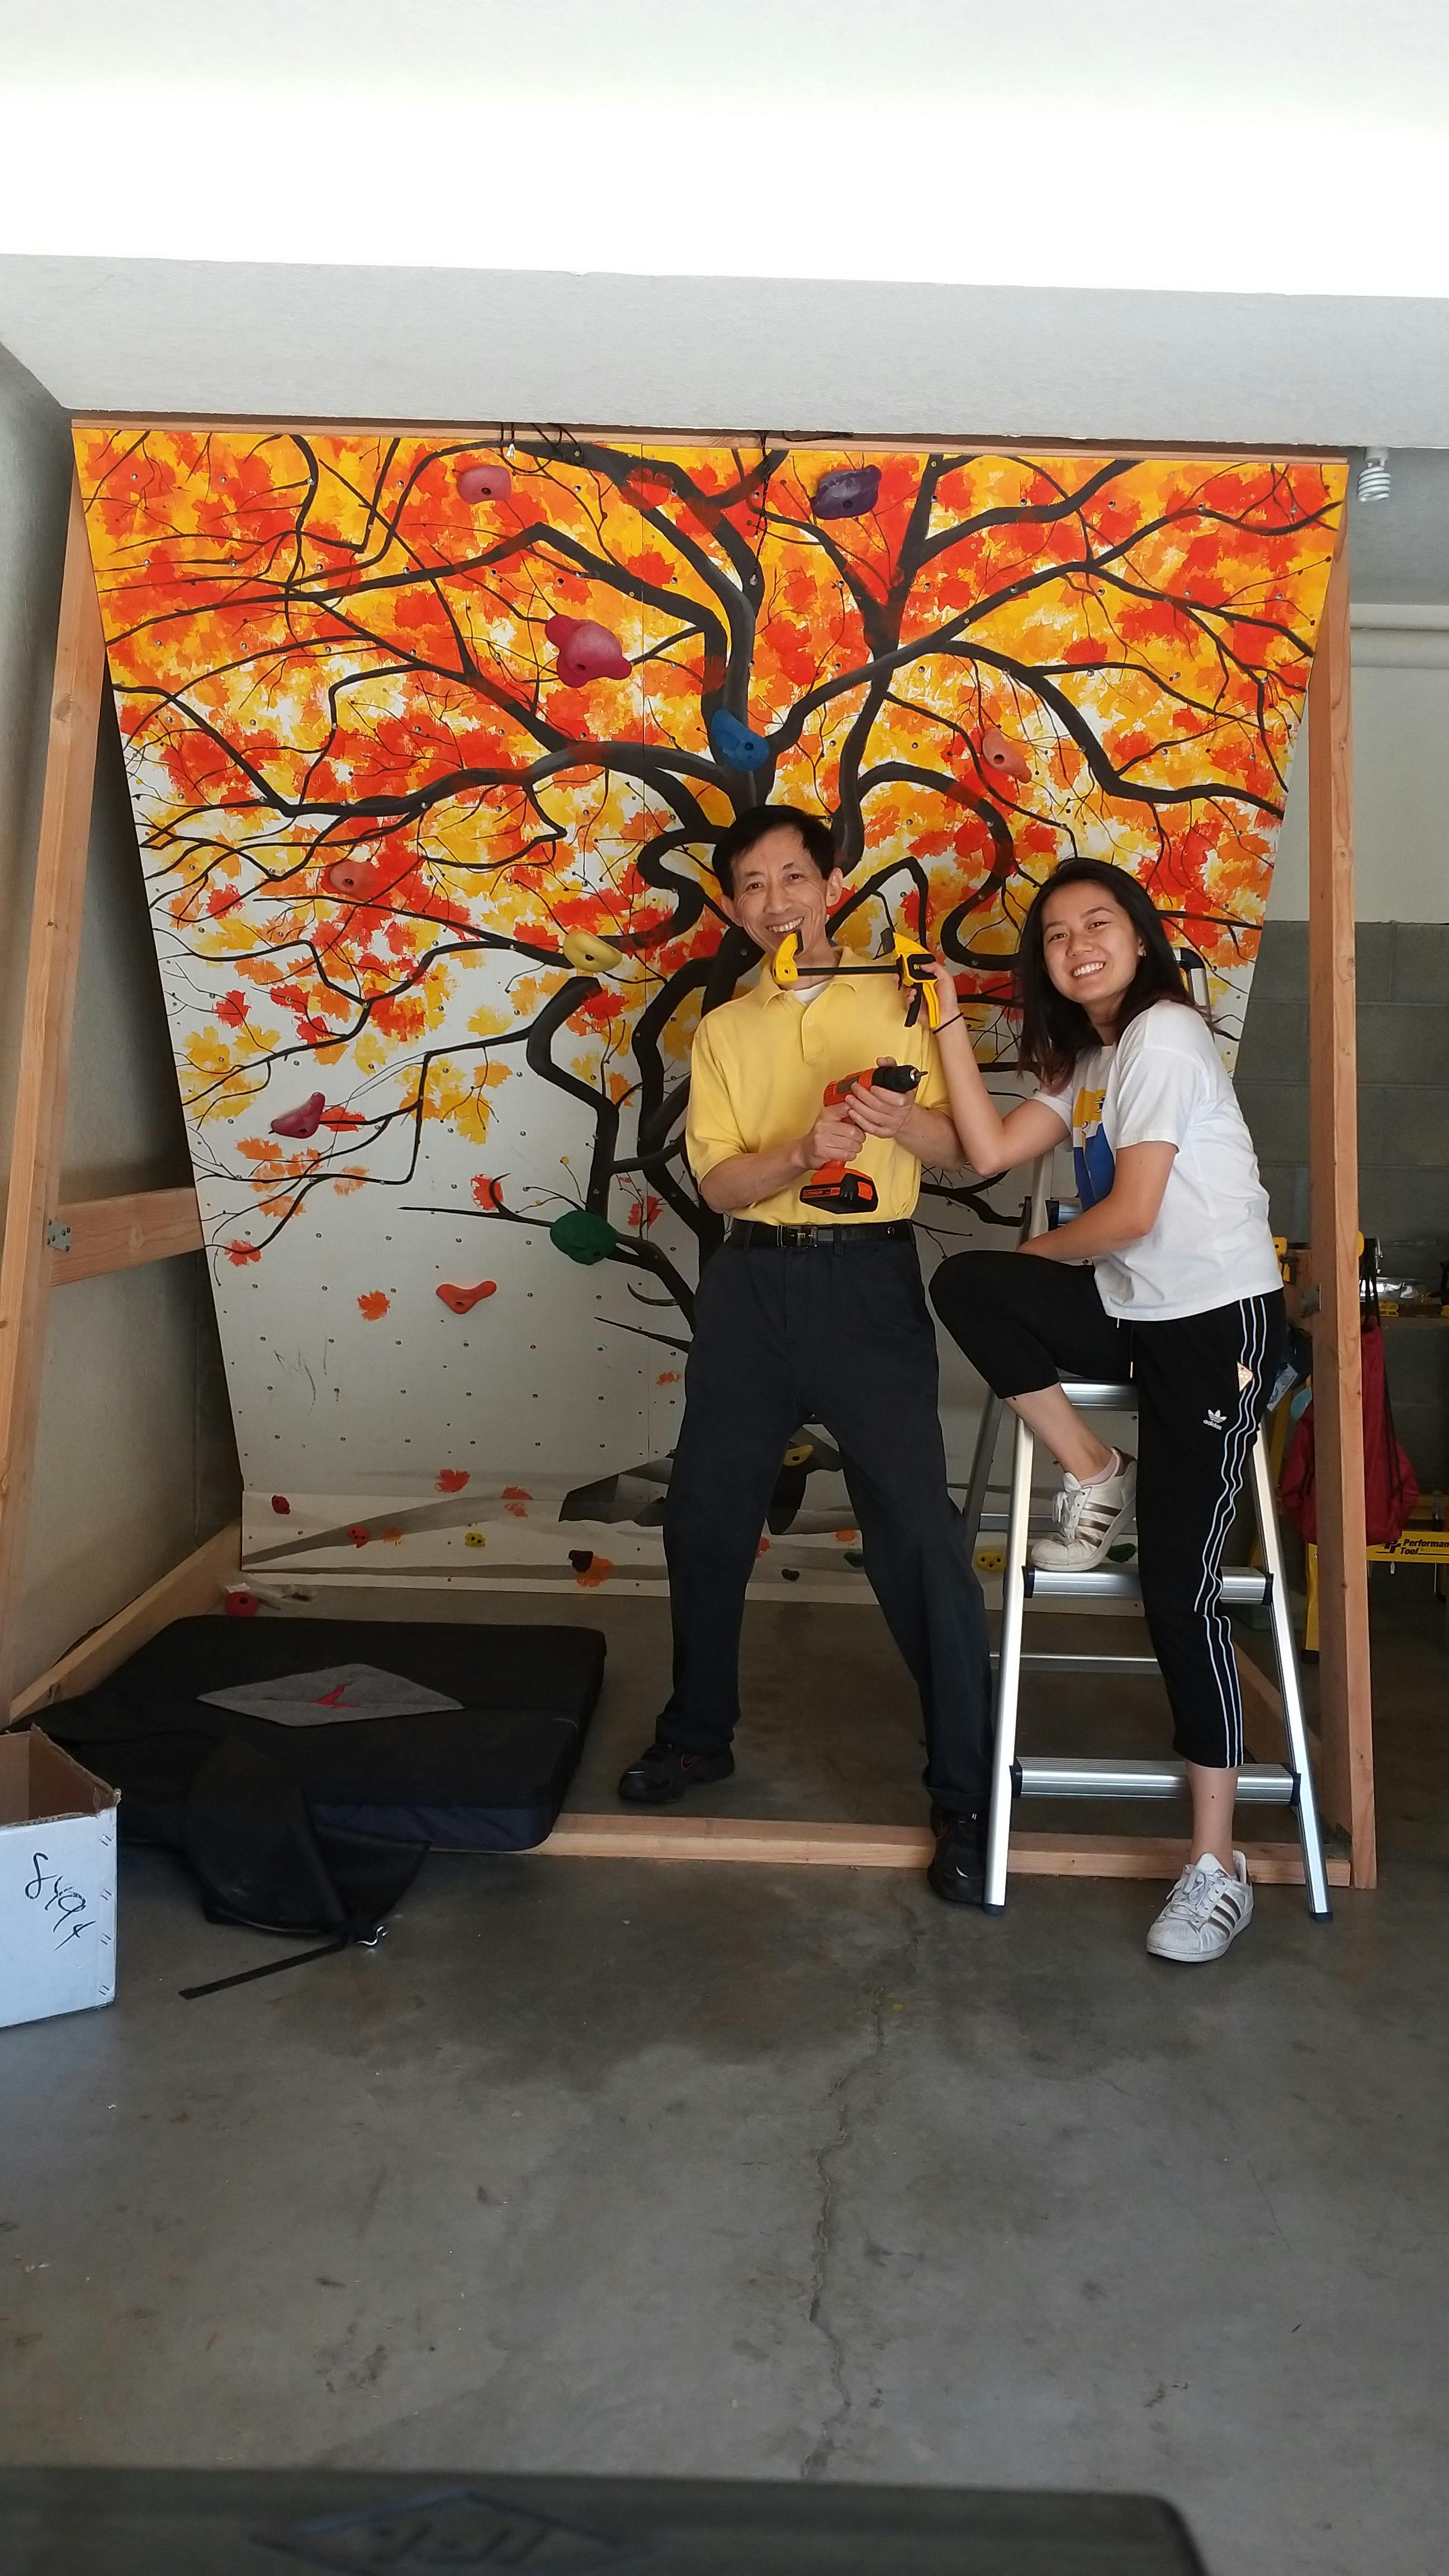 A young woman holding a clamp poses over an older man holding a drill in front of a person-sized canvas painted with an orange-and-yellow-leafed tree.